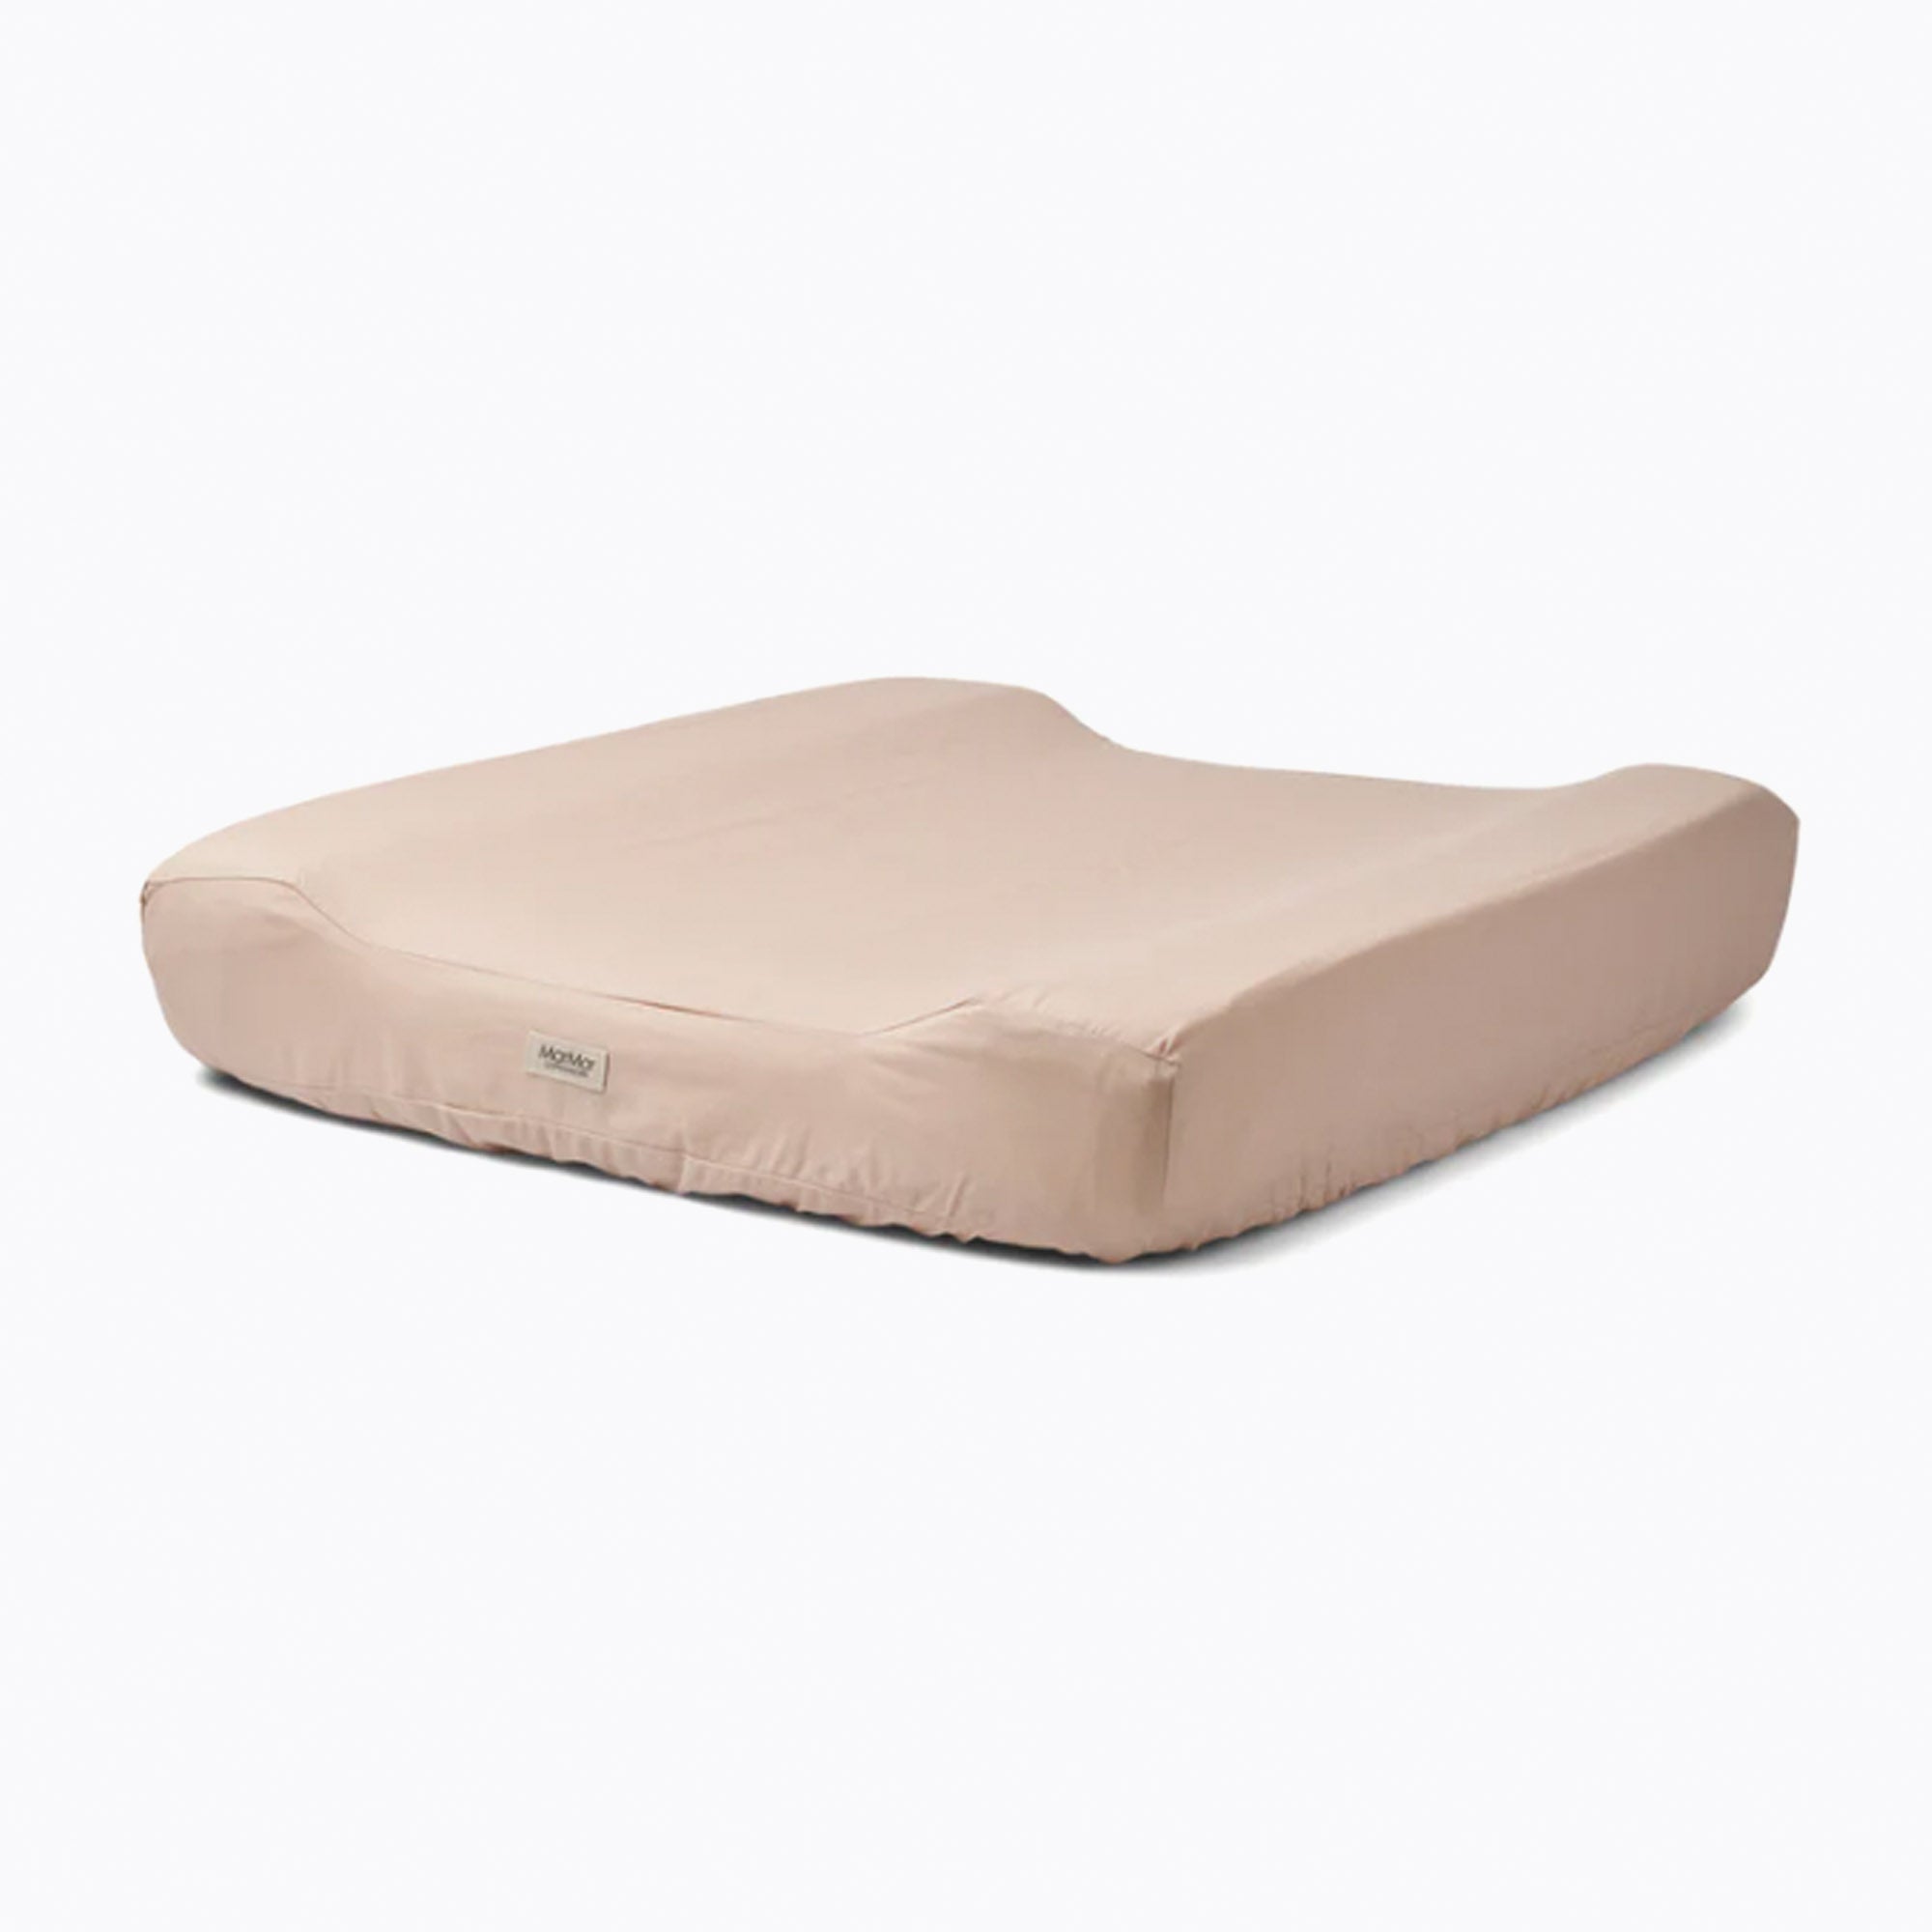 An image of Buy MarMar Copenhagen Changing Cushion Cover at SmallSmart UK Beige Rose